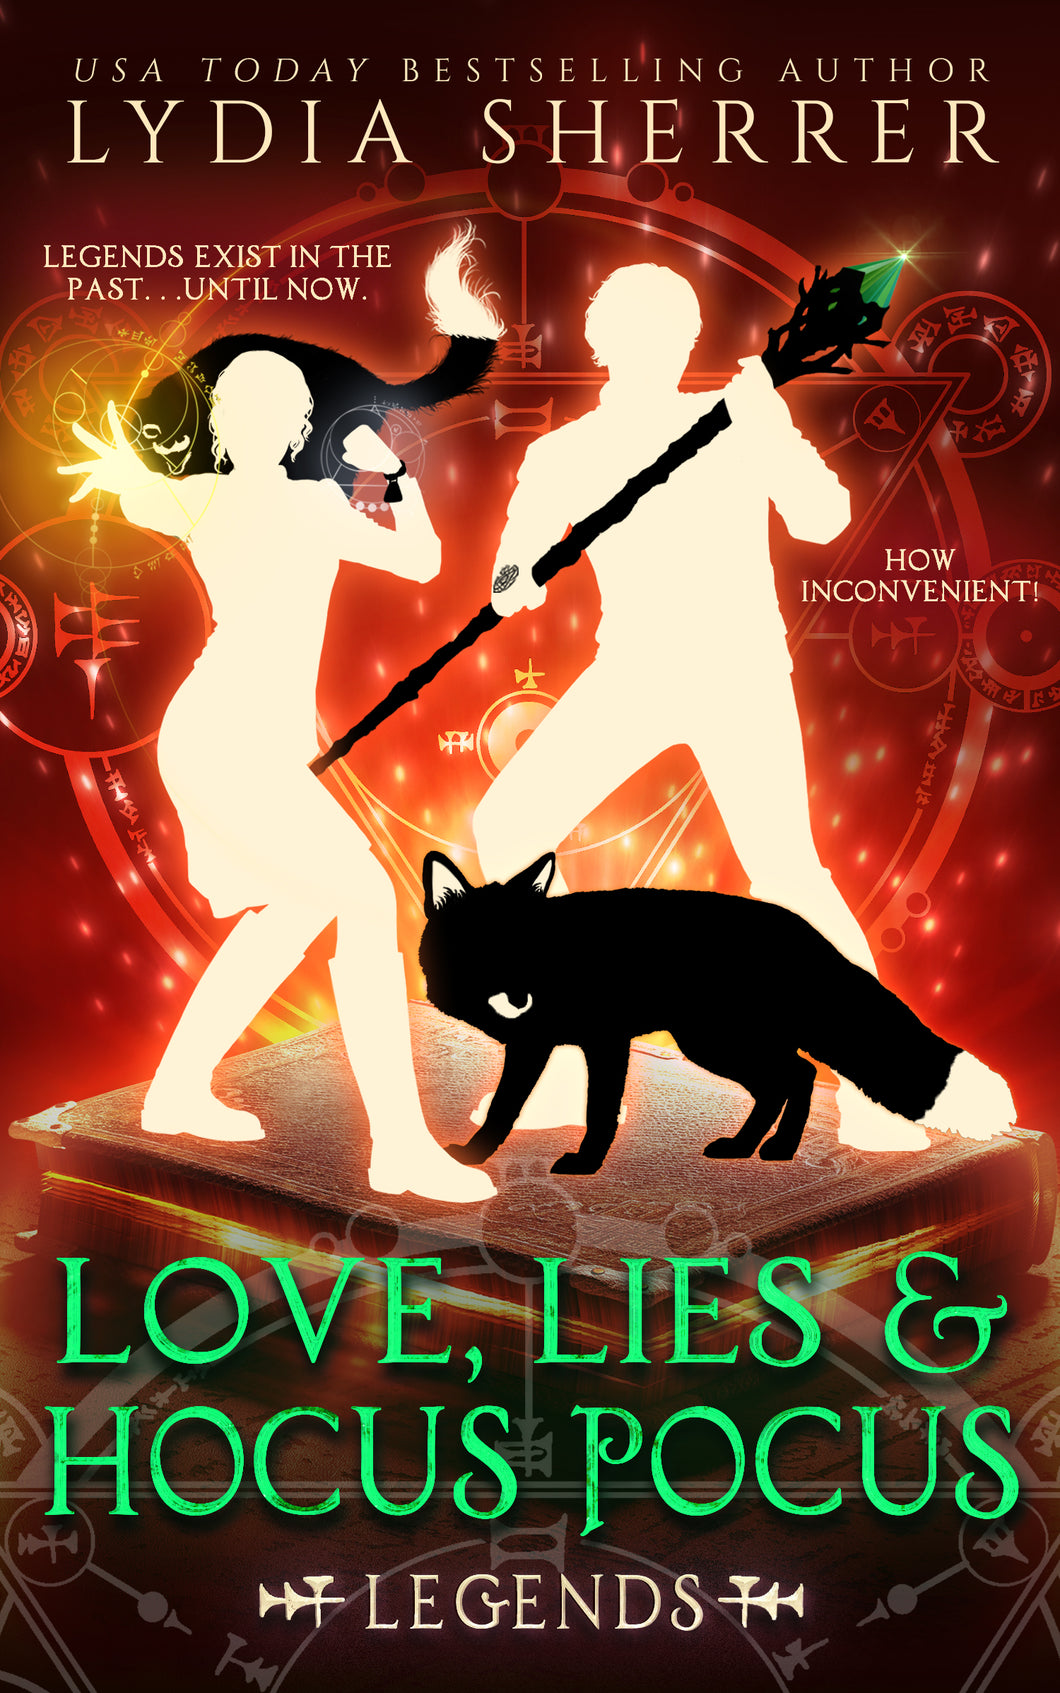 Paperback Book - Love, Lies, and Hocus Pocus Legends (Book 4 The Lily Singer Adventures)